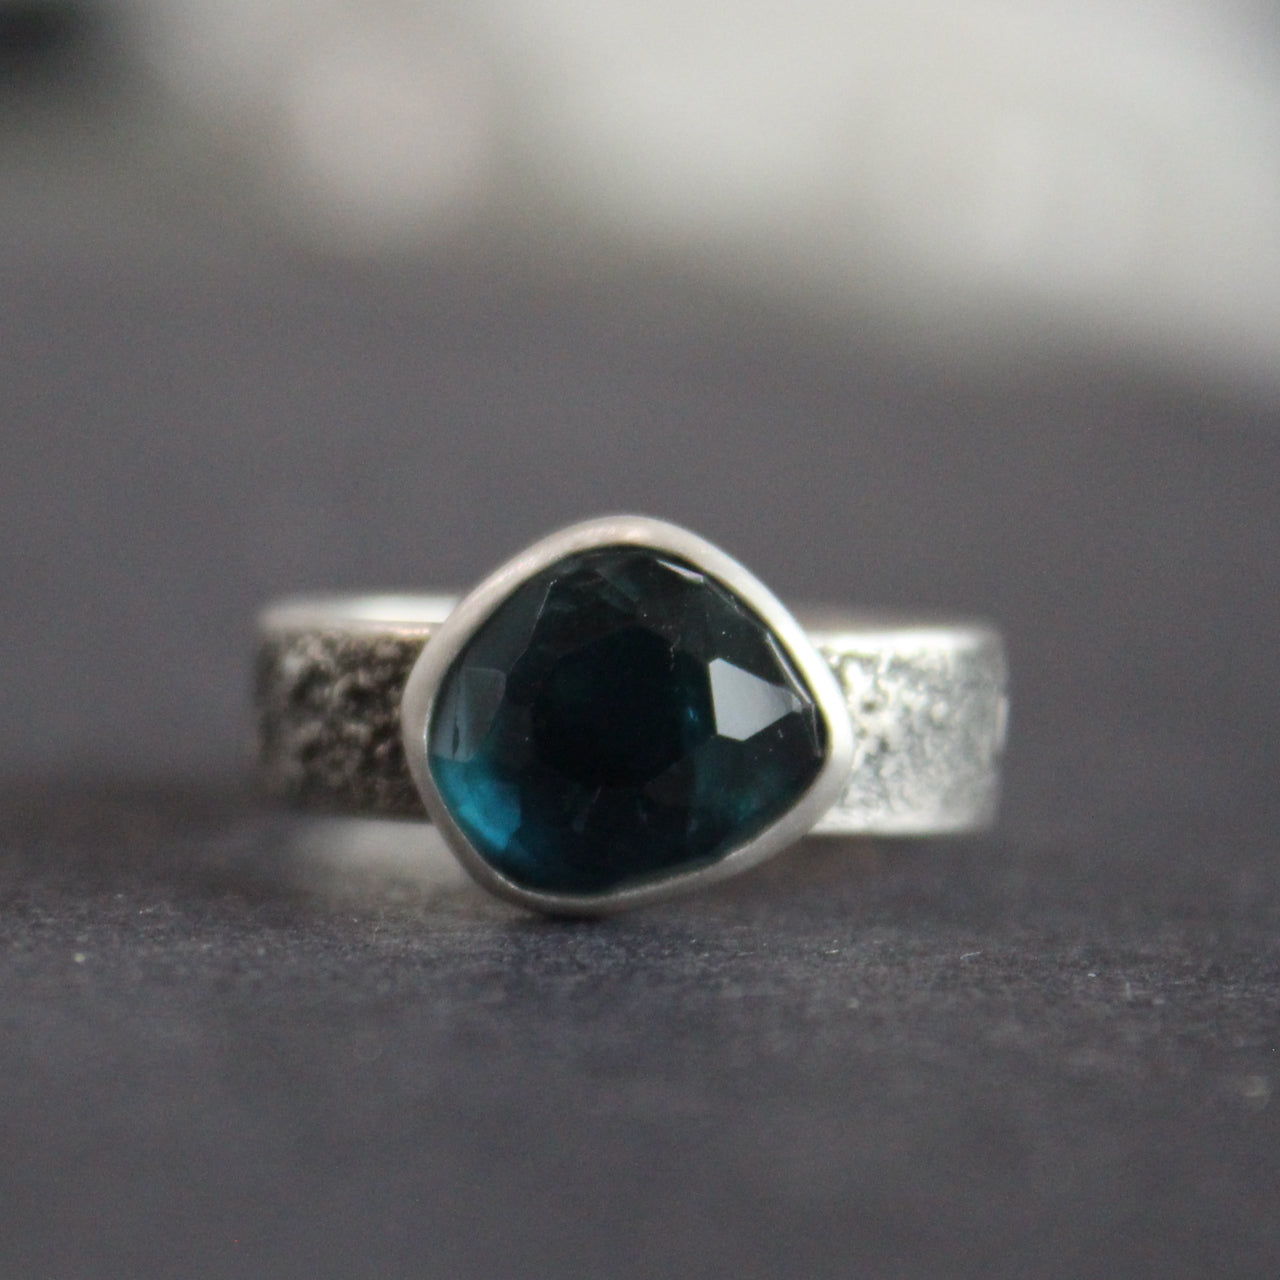 Blue tourmaline stone set in a textured silver ring 